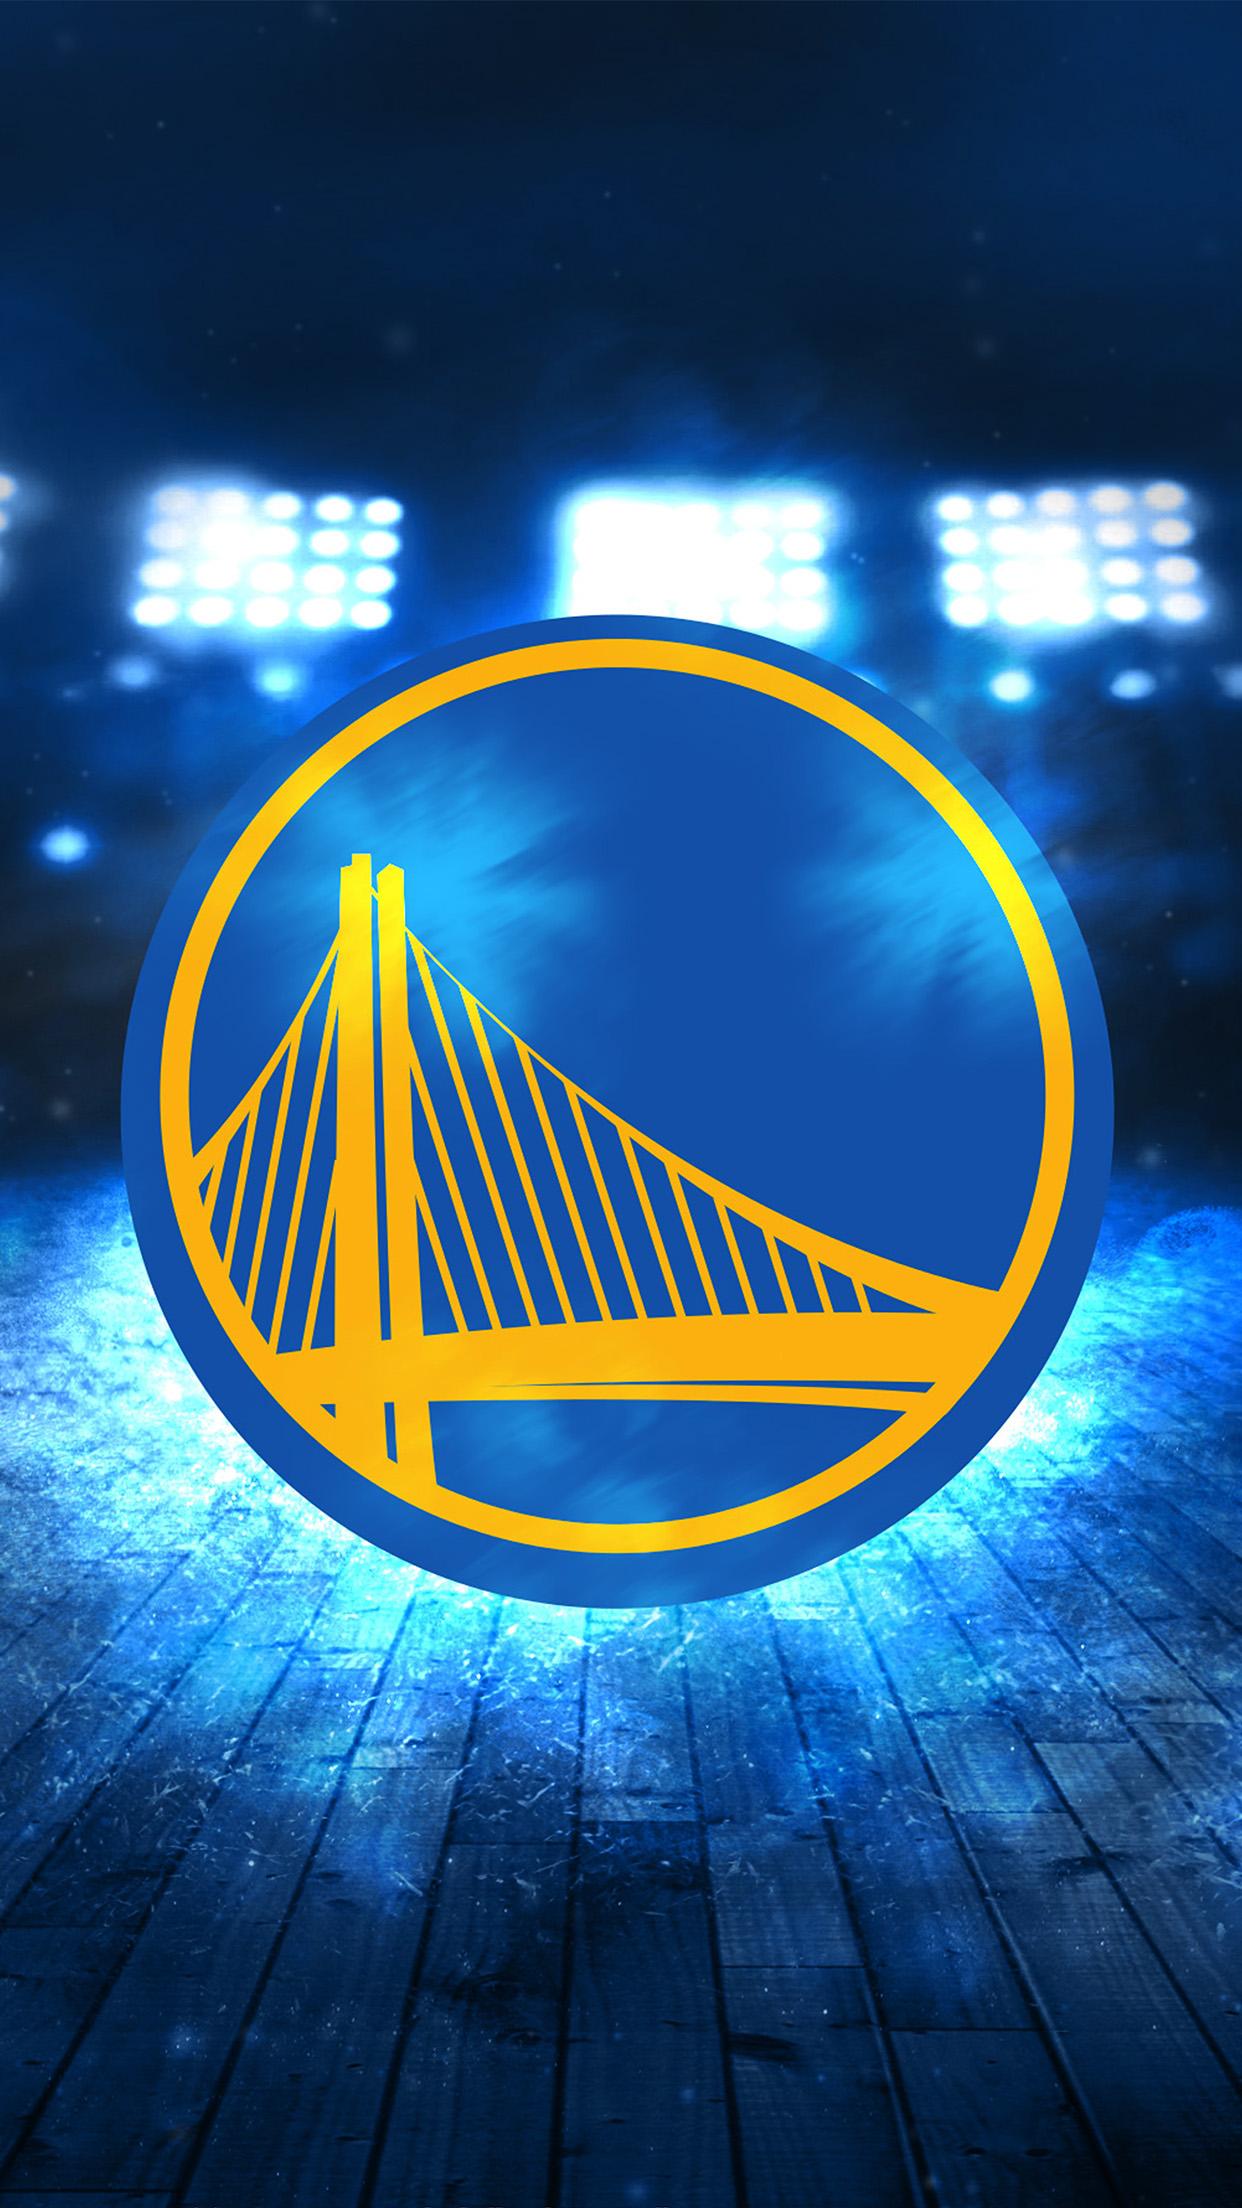 Golden State Warriors Logo - iPhone6papers.co. iPhone 6 wallpaper. golden state warriors